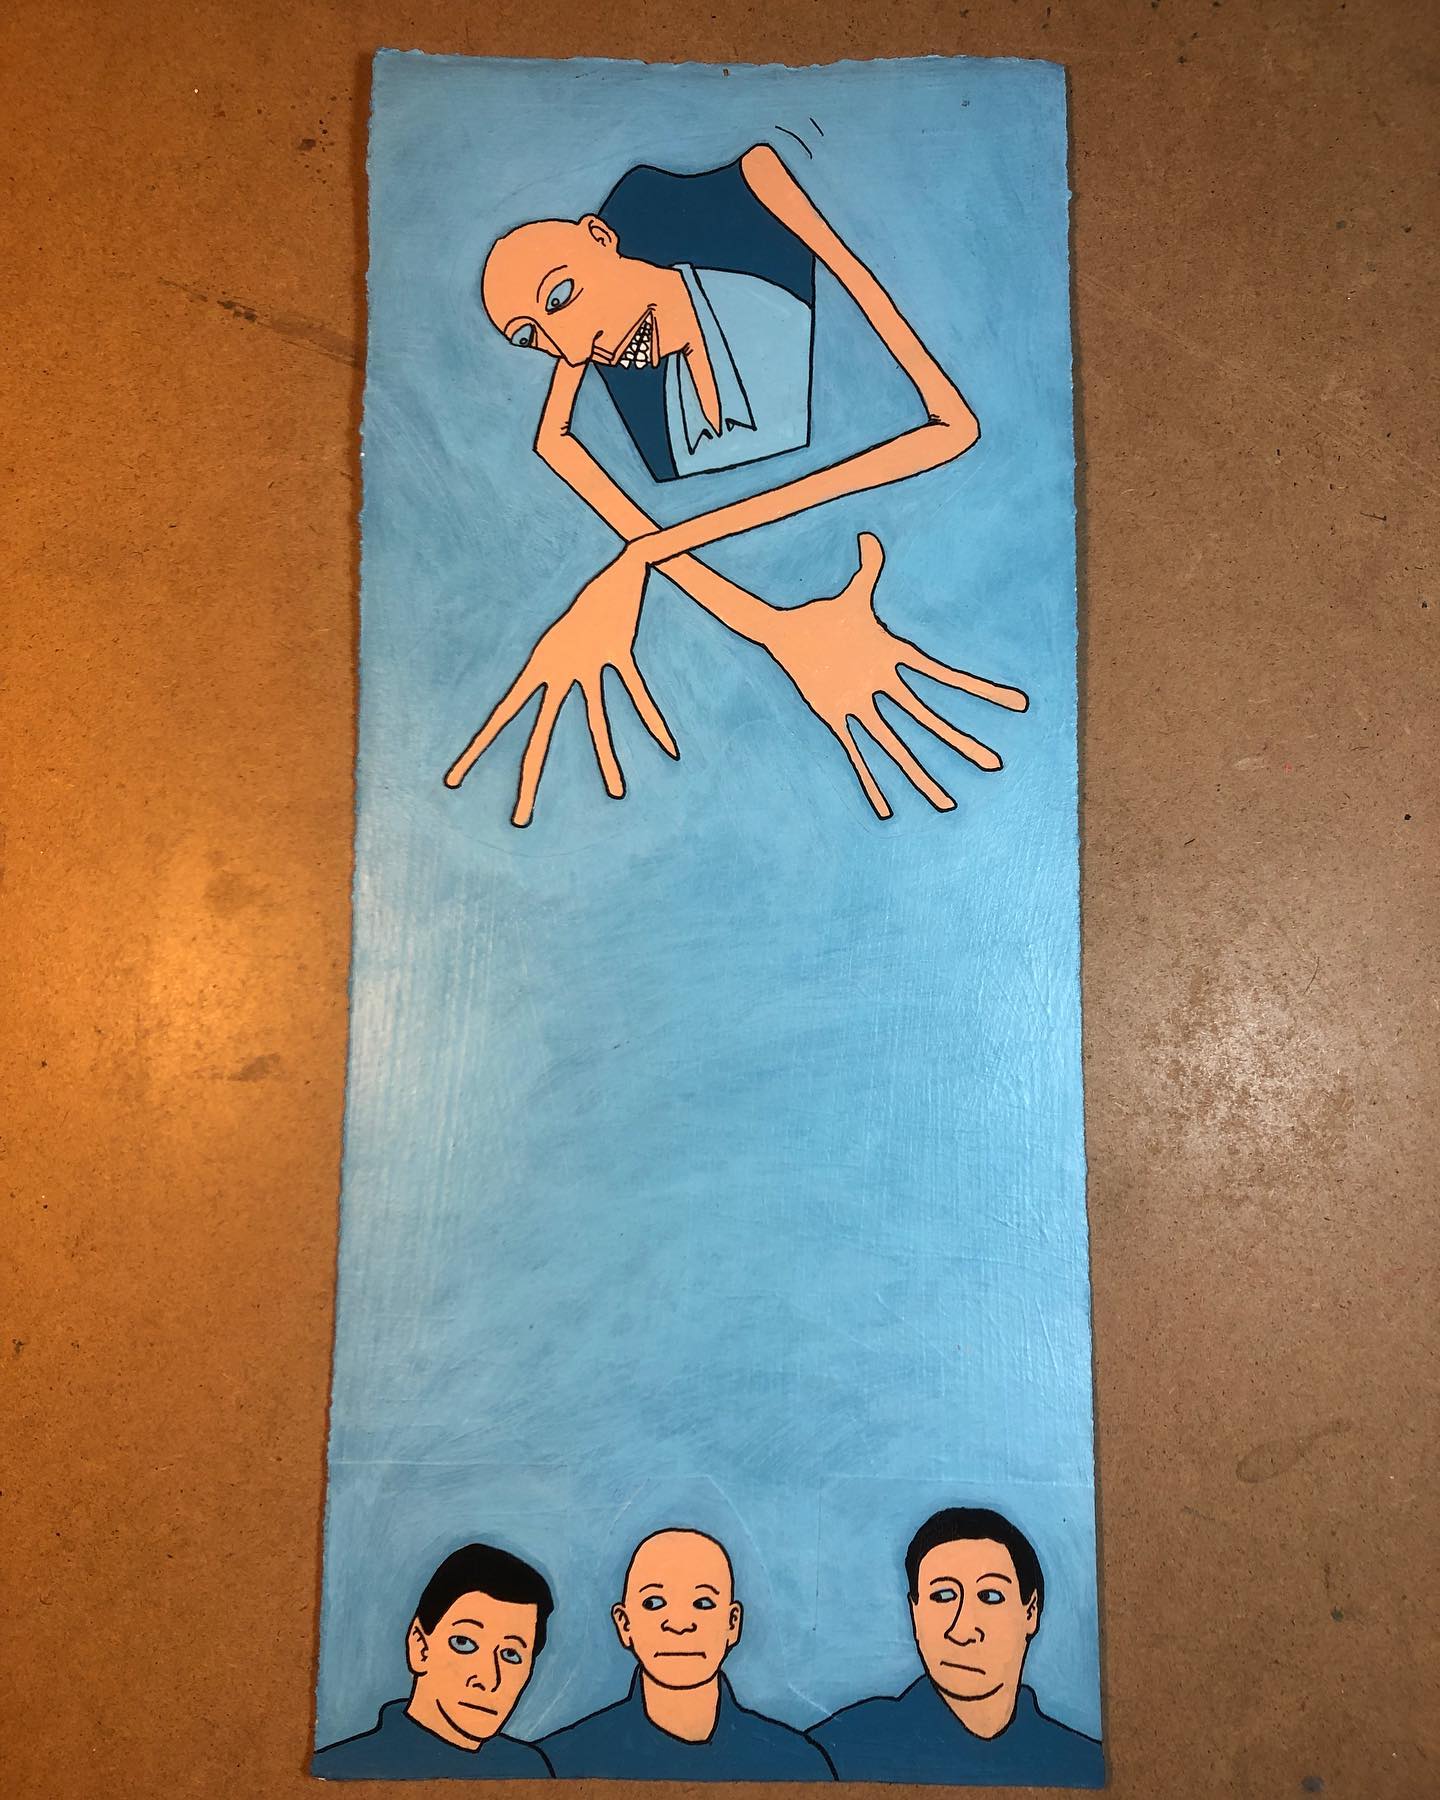 Blue painting of three heads at bottom and a hovering godlike character above on a light blue background.